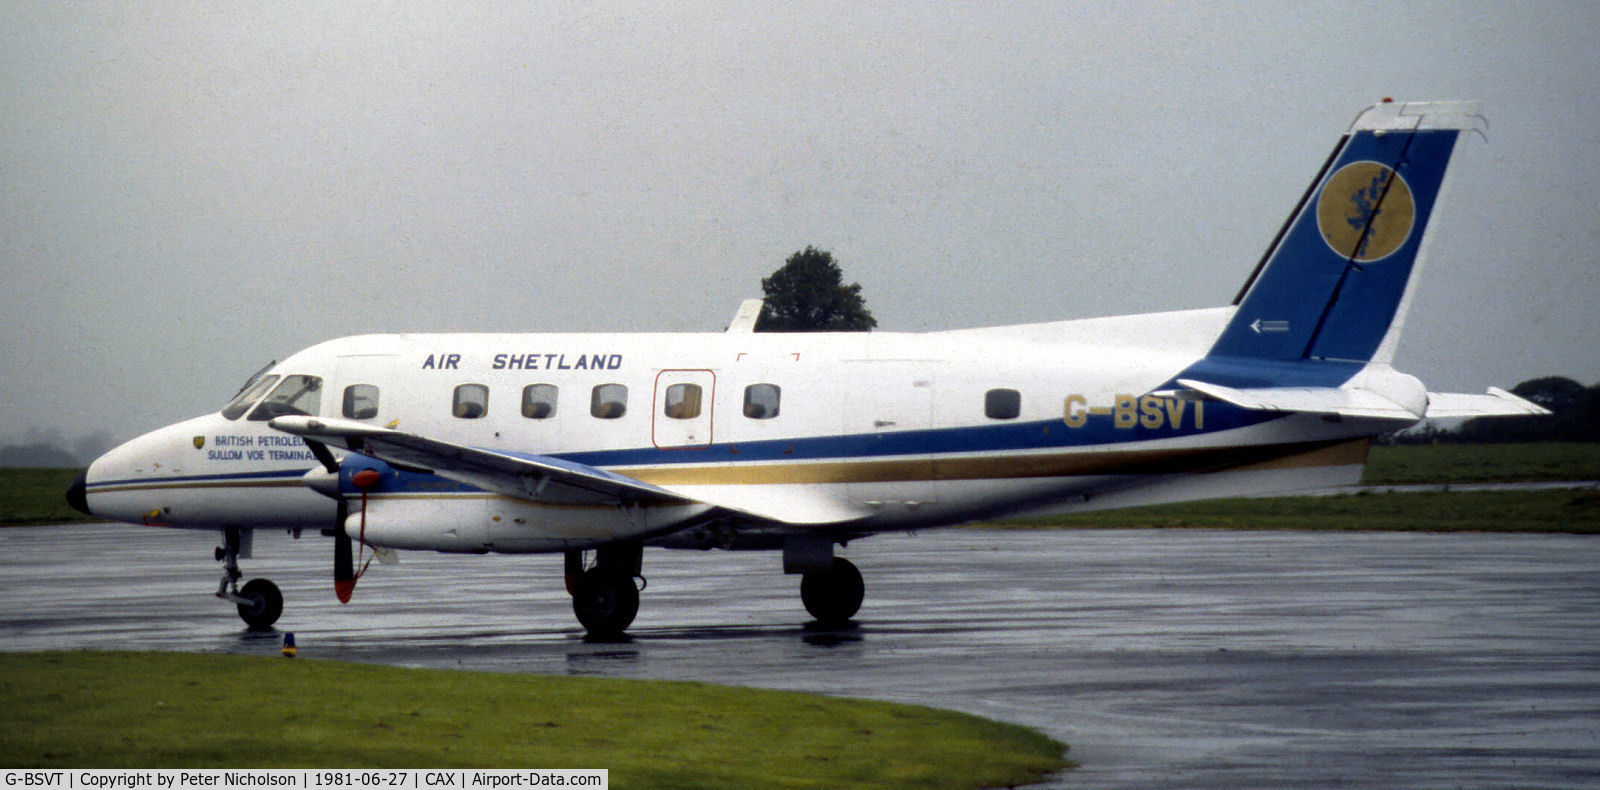 G-BSVT, 1977 Embraer EMB-110P2 Bandeirante C/N 110153, This EMB-110P2 Bandeirante of Air Shetland was seen at Carlisle in the Summer of 1981.